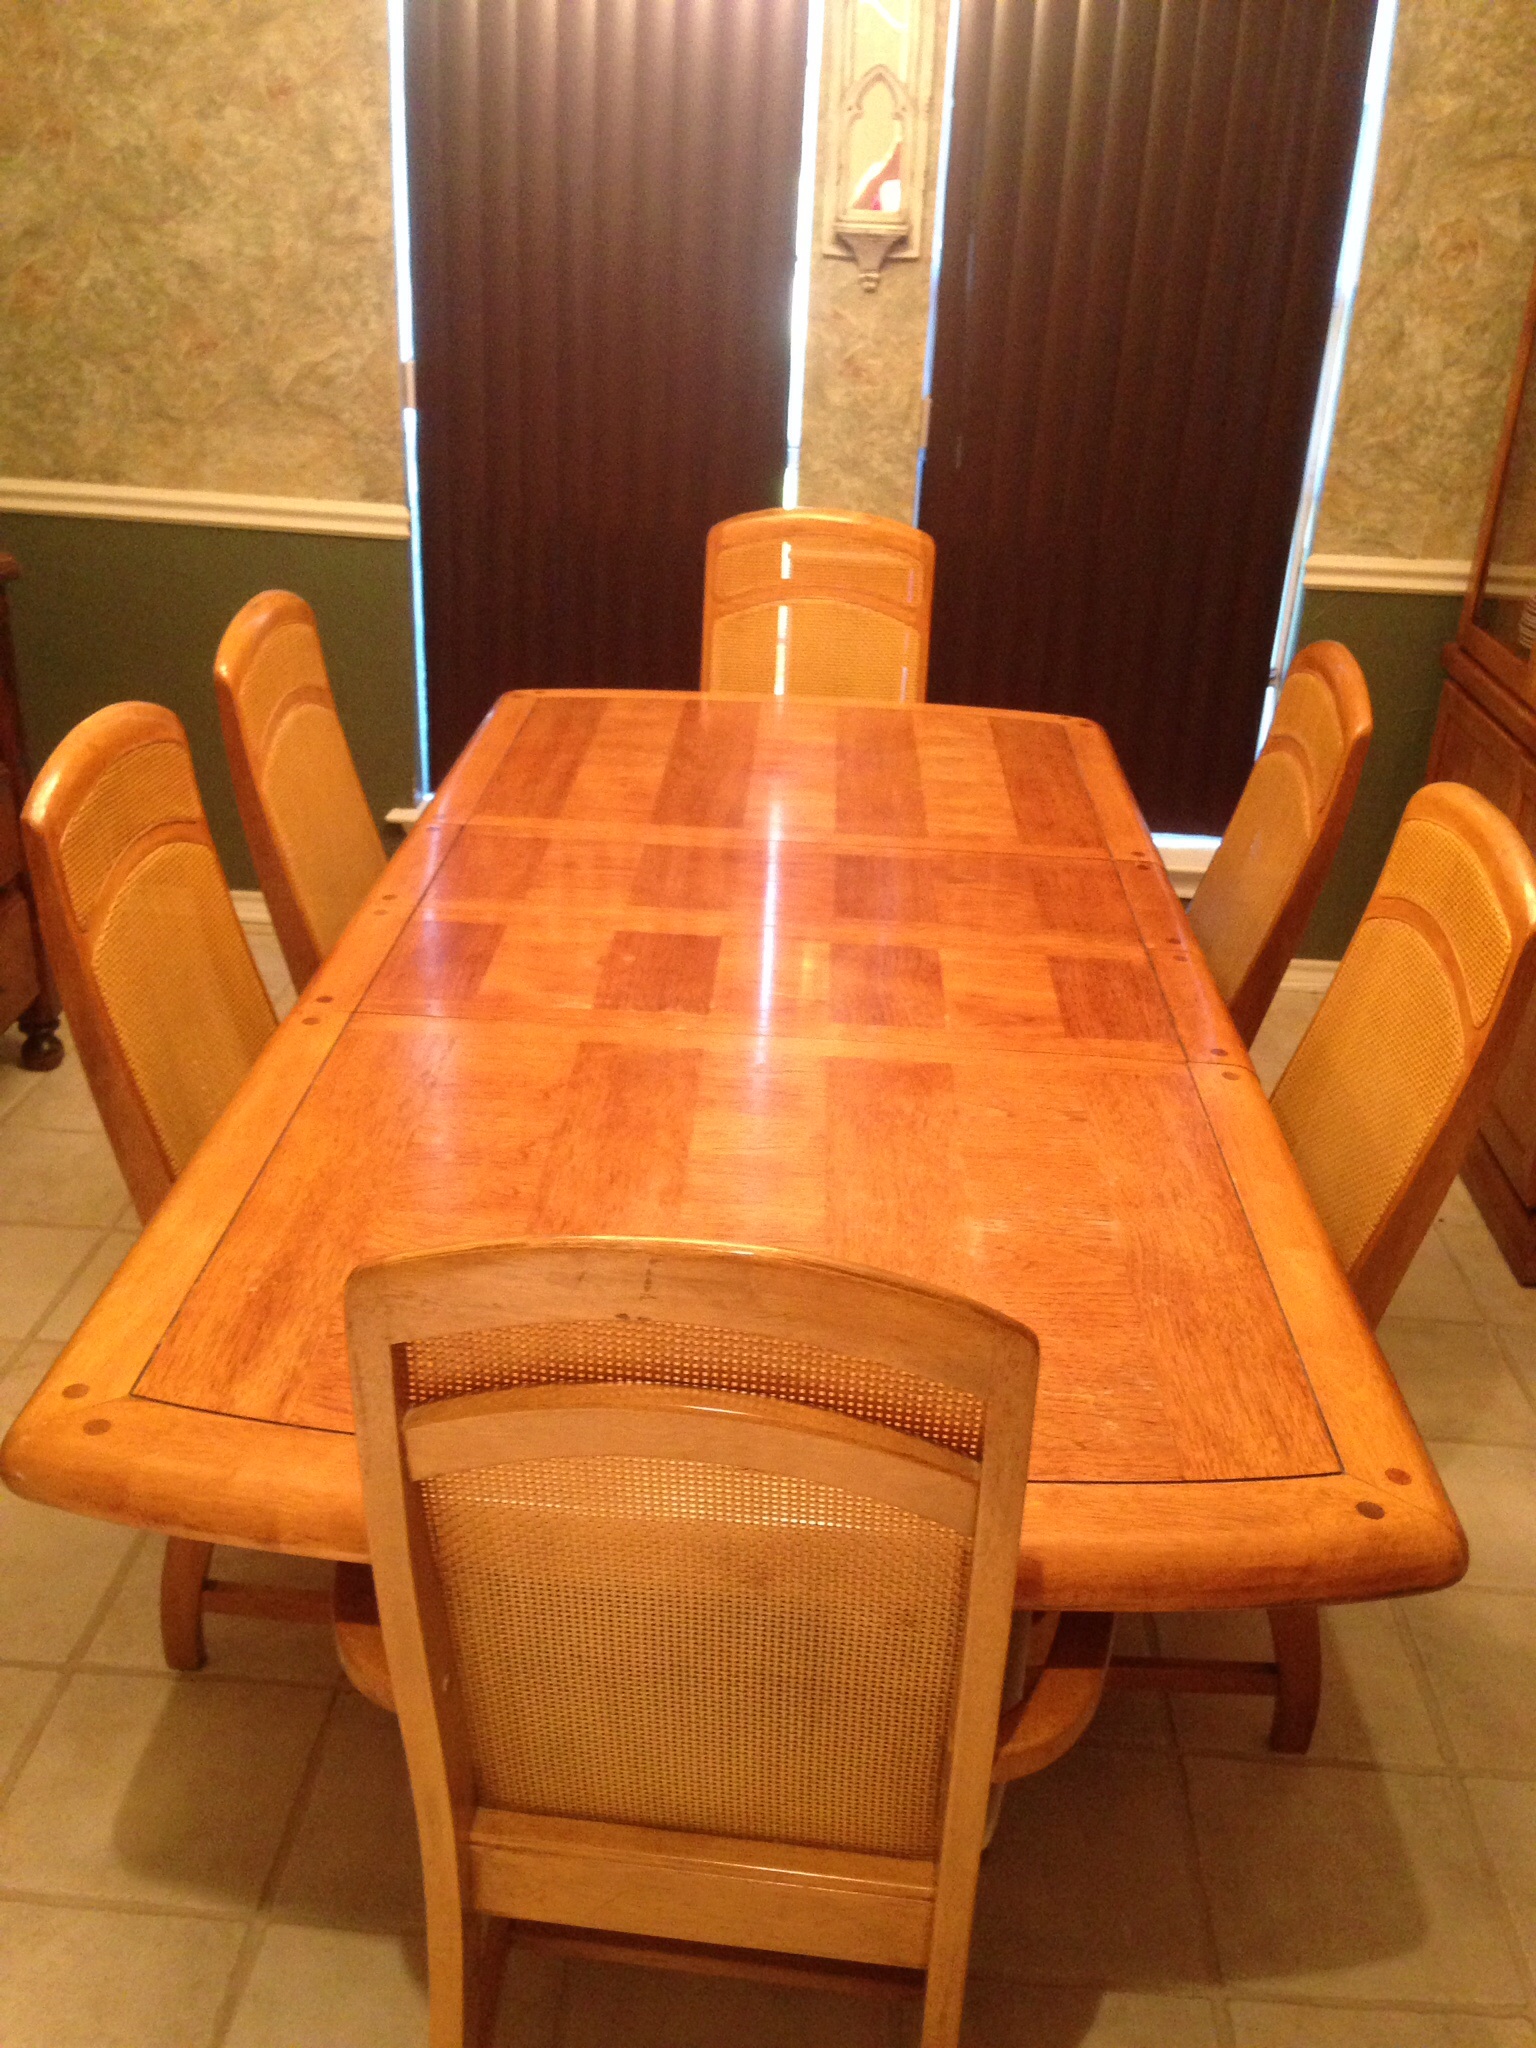 Dining table with 2 leafs, 6 chairs and a china hutch